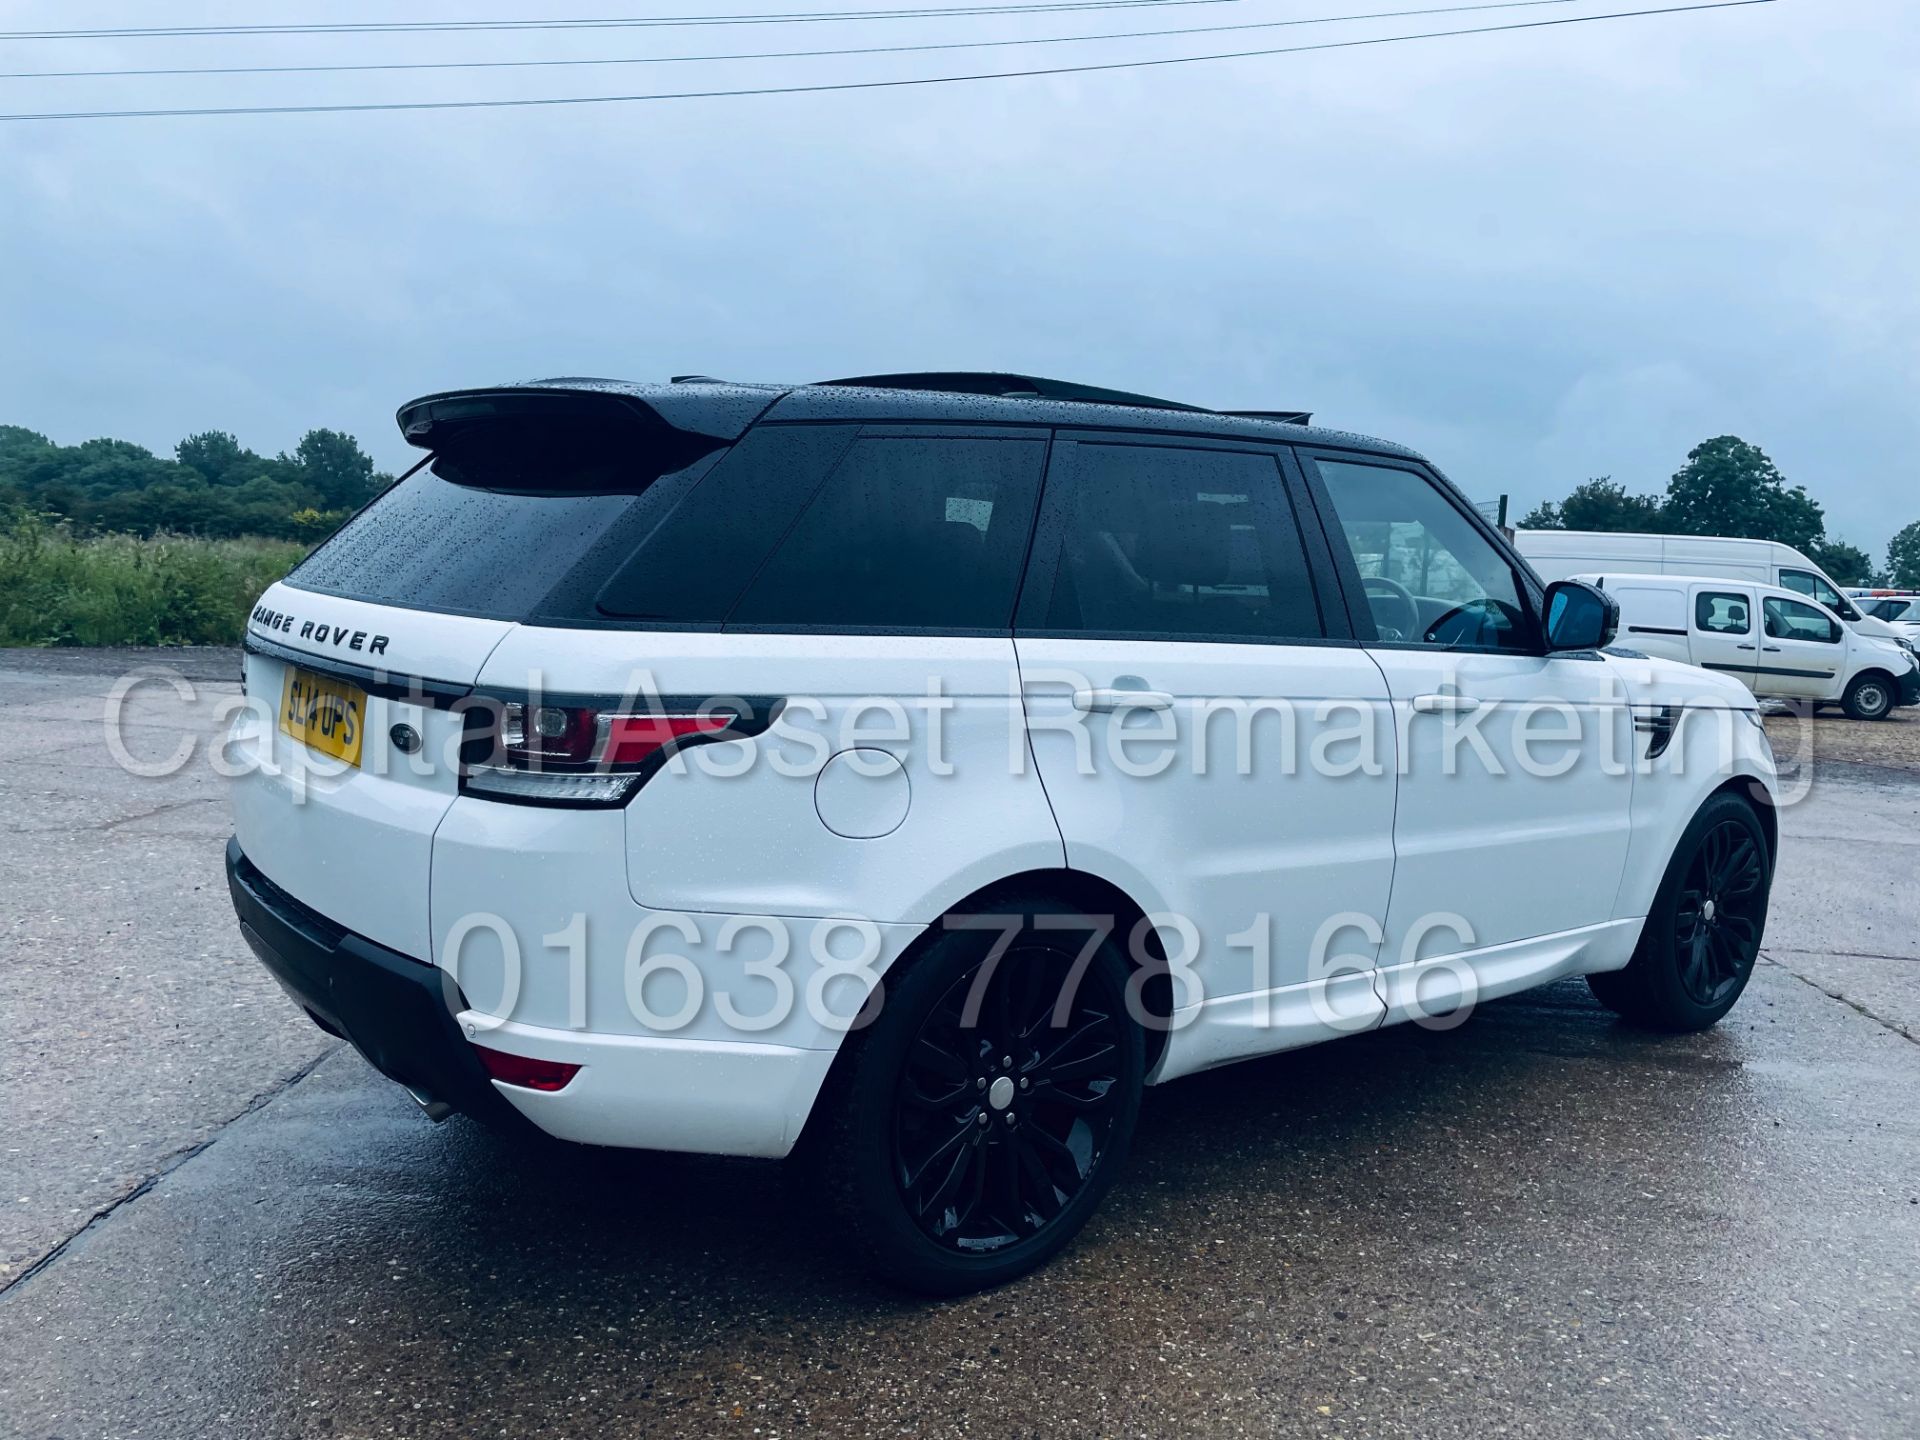 On Sale RANGE ROVER SPORT *SPECIAL EDITION* (2014) '3.0 TDV6 - AUTO' *SAT NAV & PAN ROOF* (TOP SPEC) - Image 9 of 54